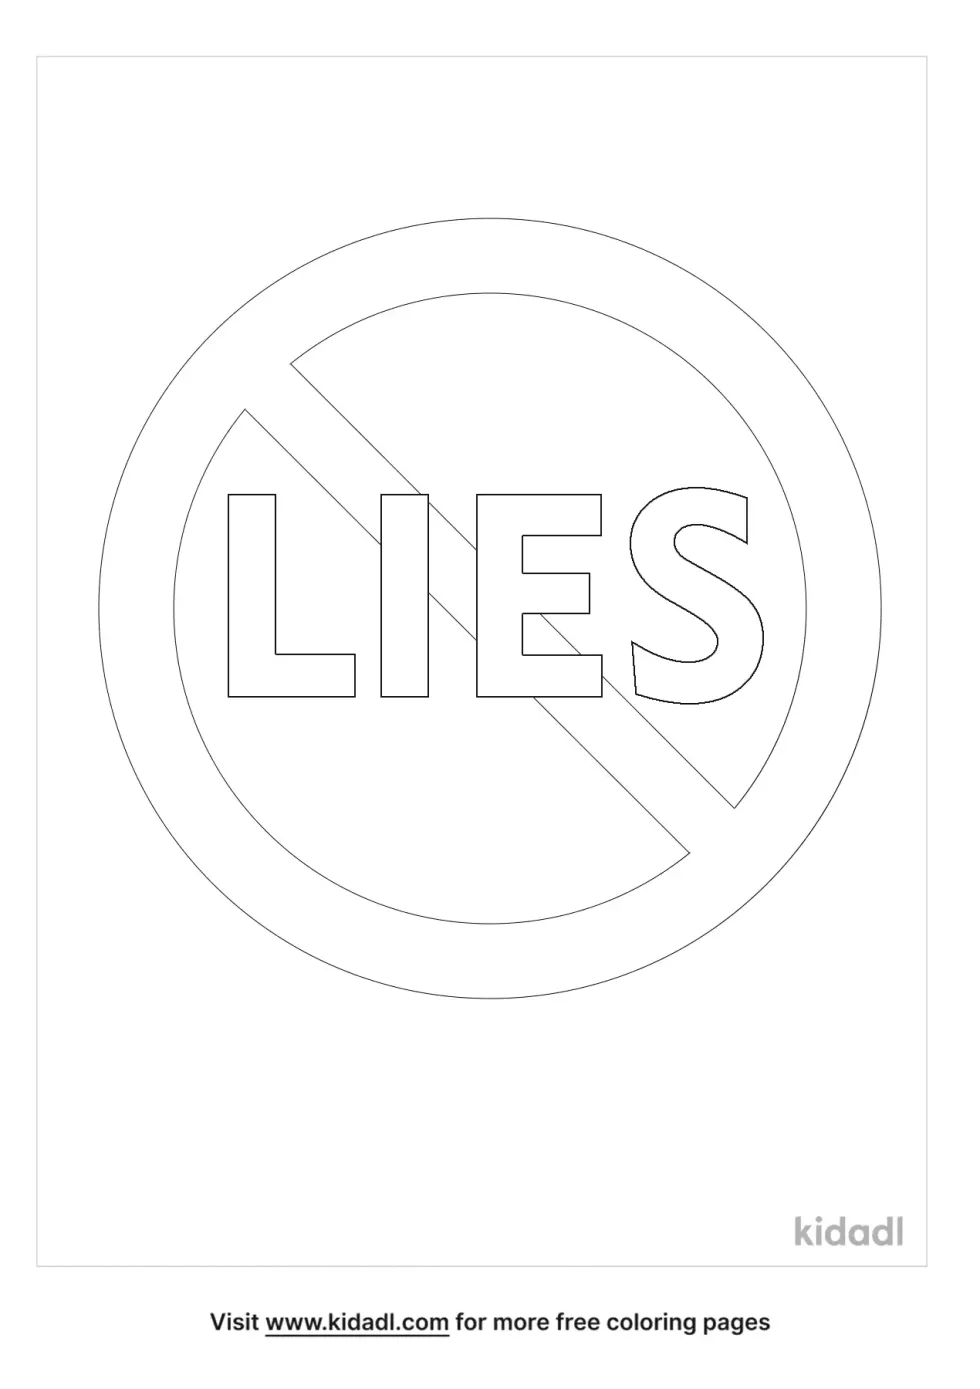 Don't Tell Lies Coloring Page